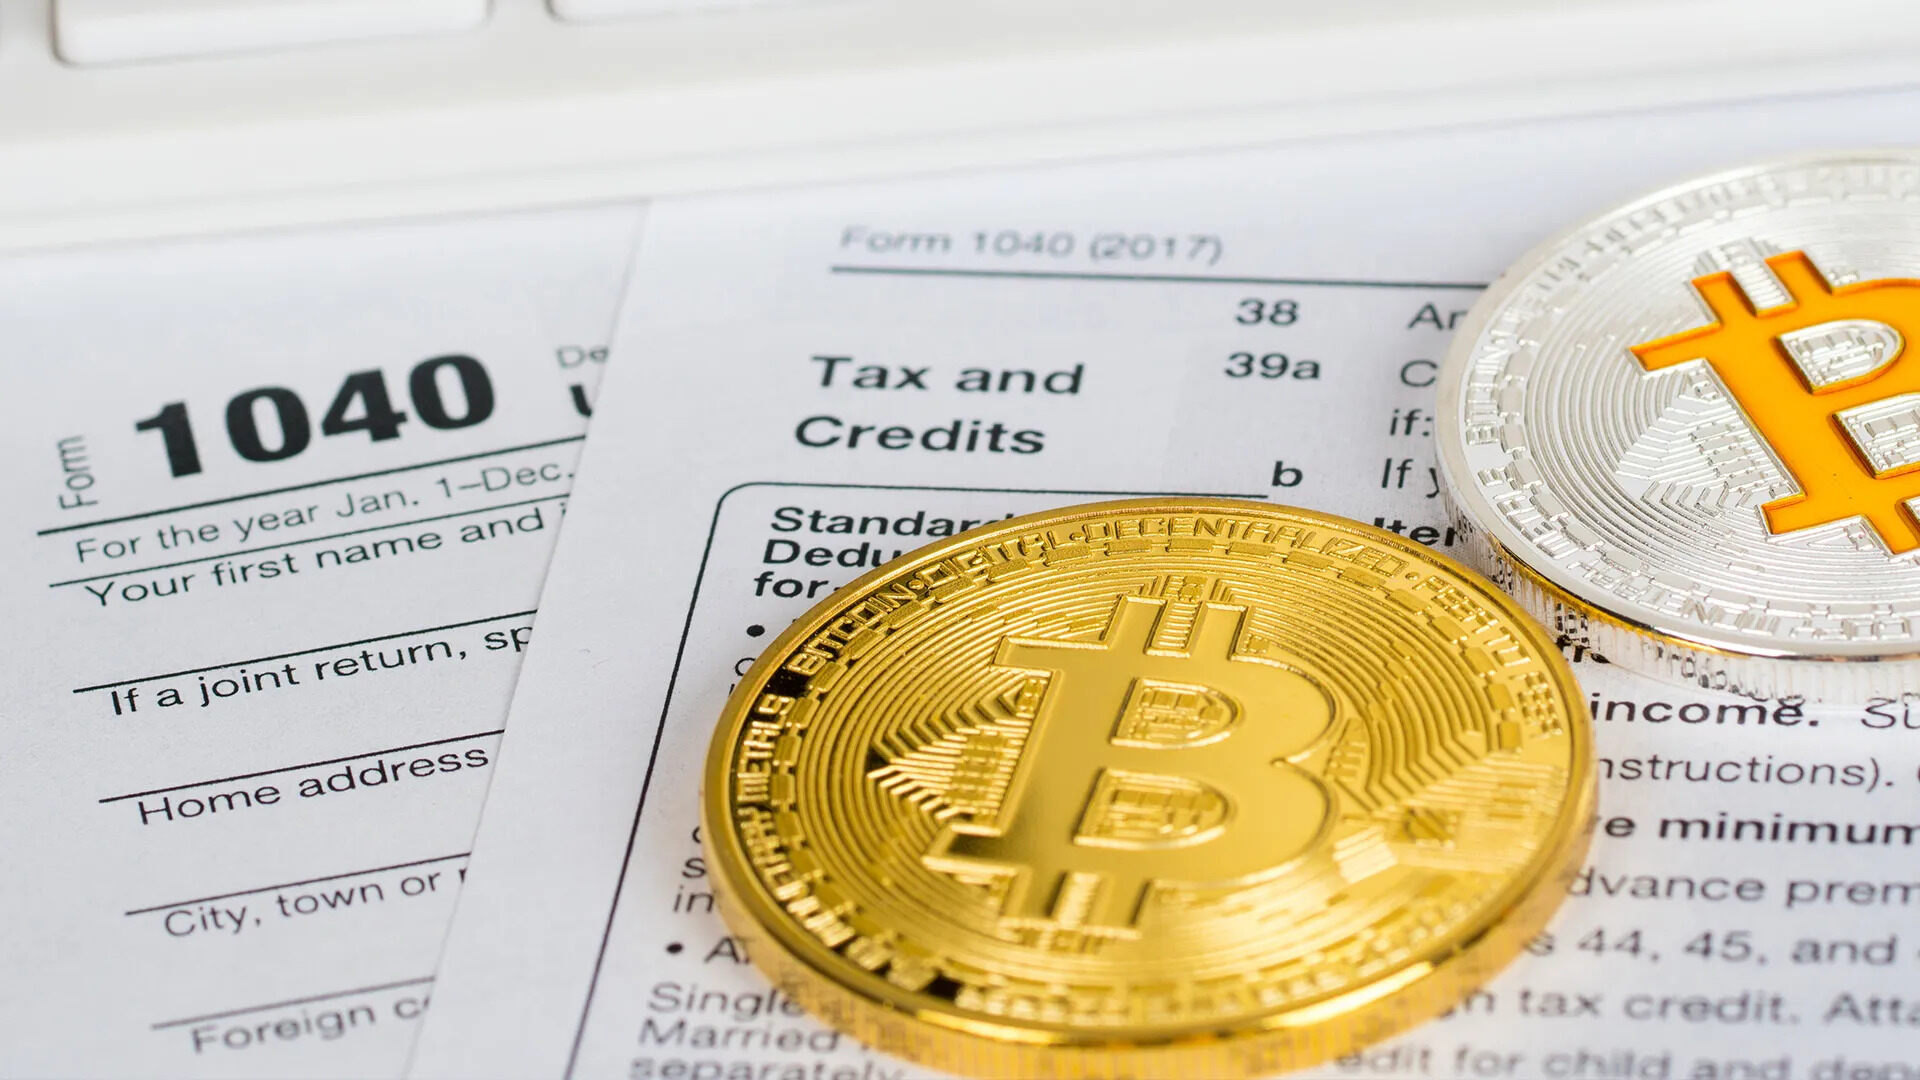 What Is The Tax On Cryptocurrency